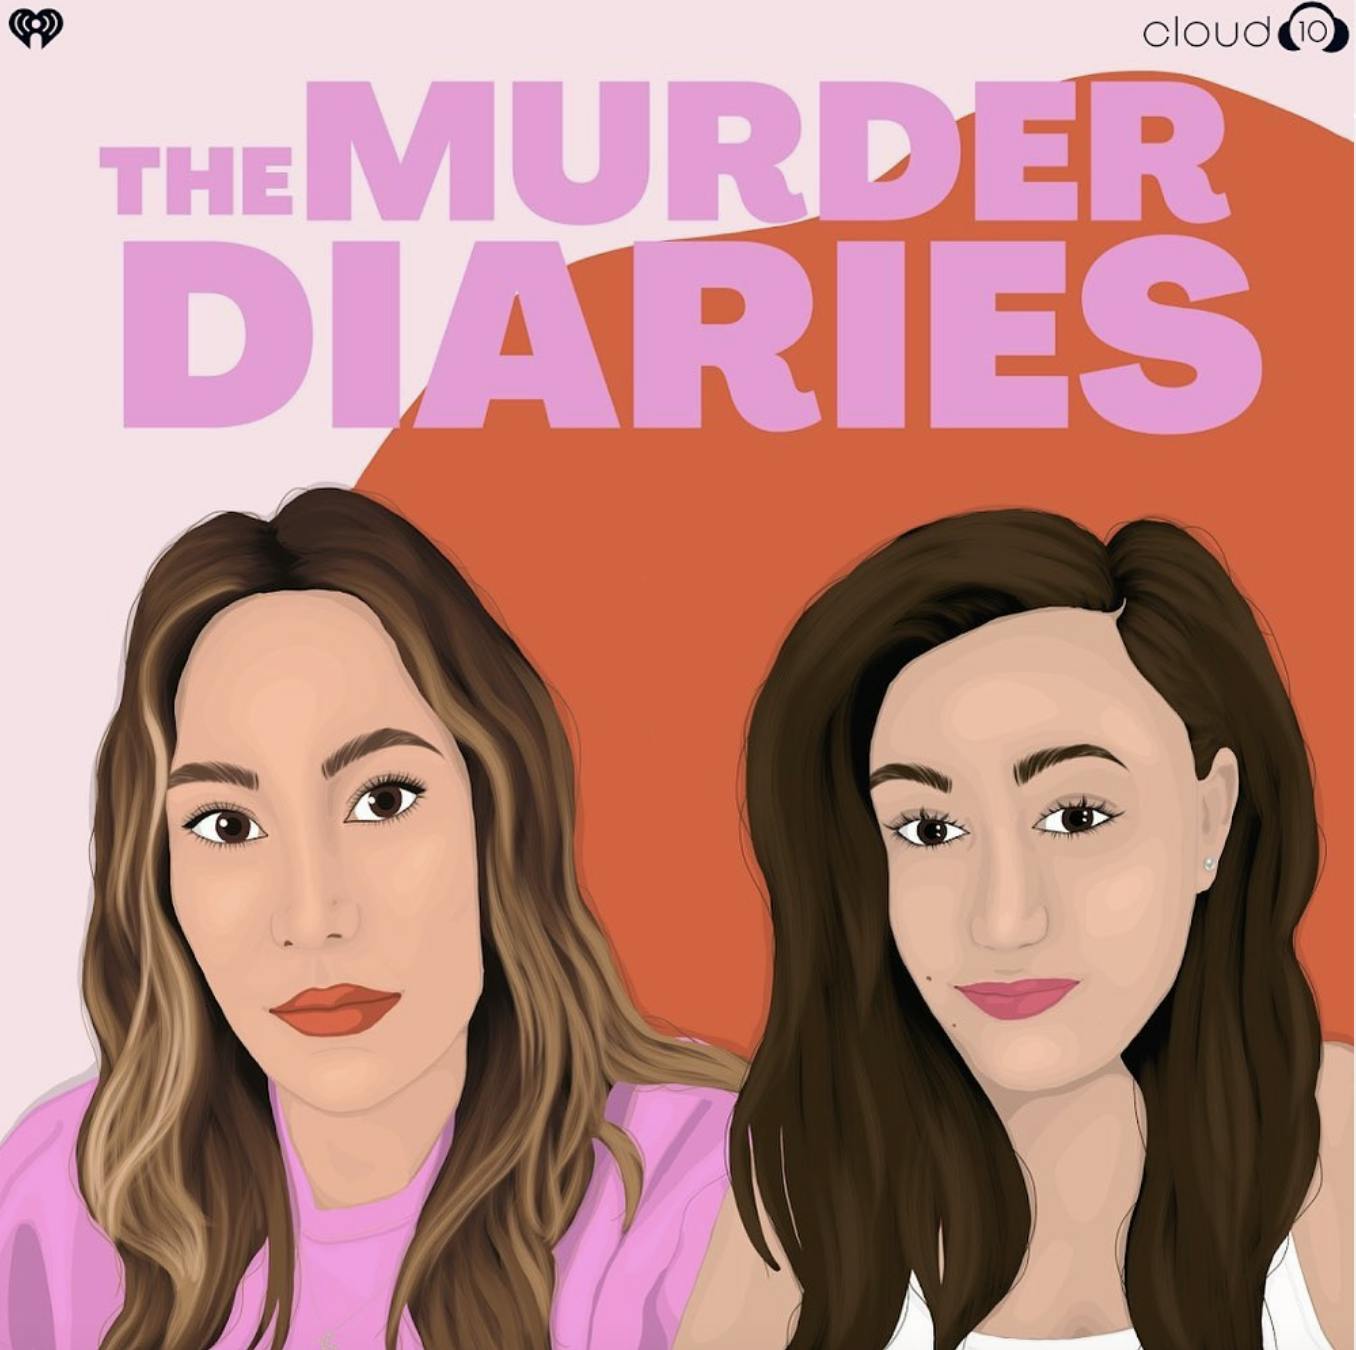 Introducing: The Murder Diaries